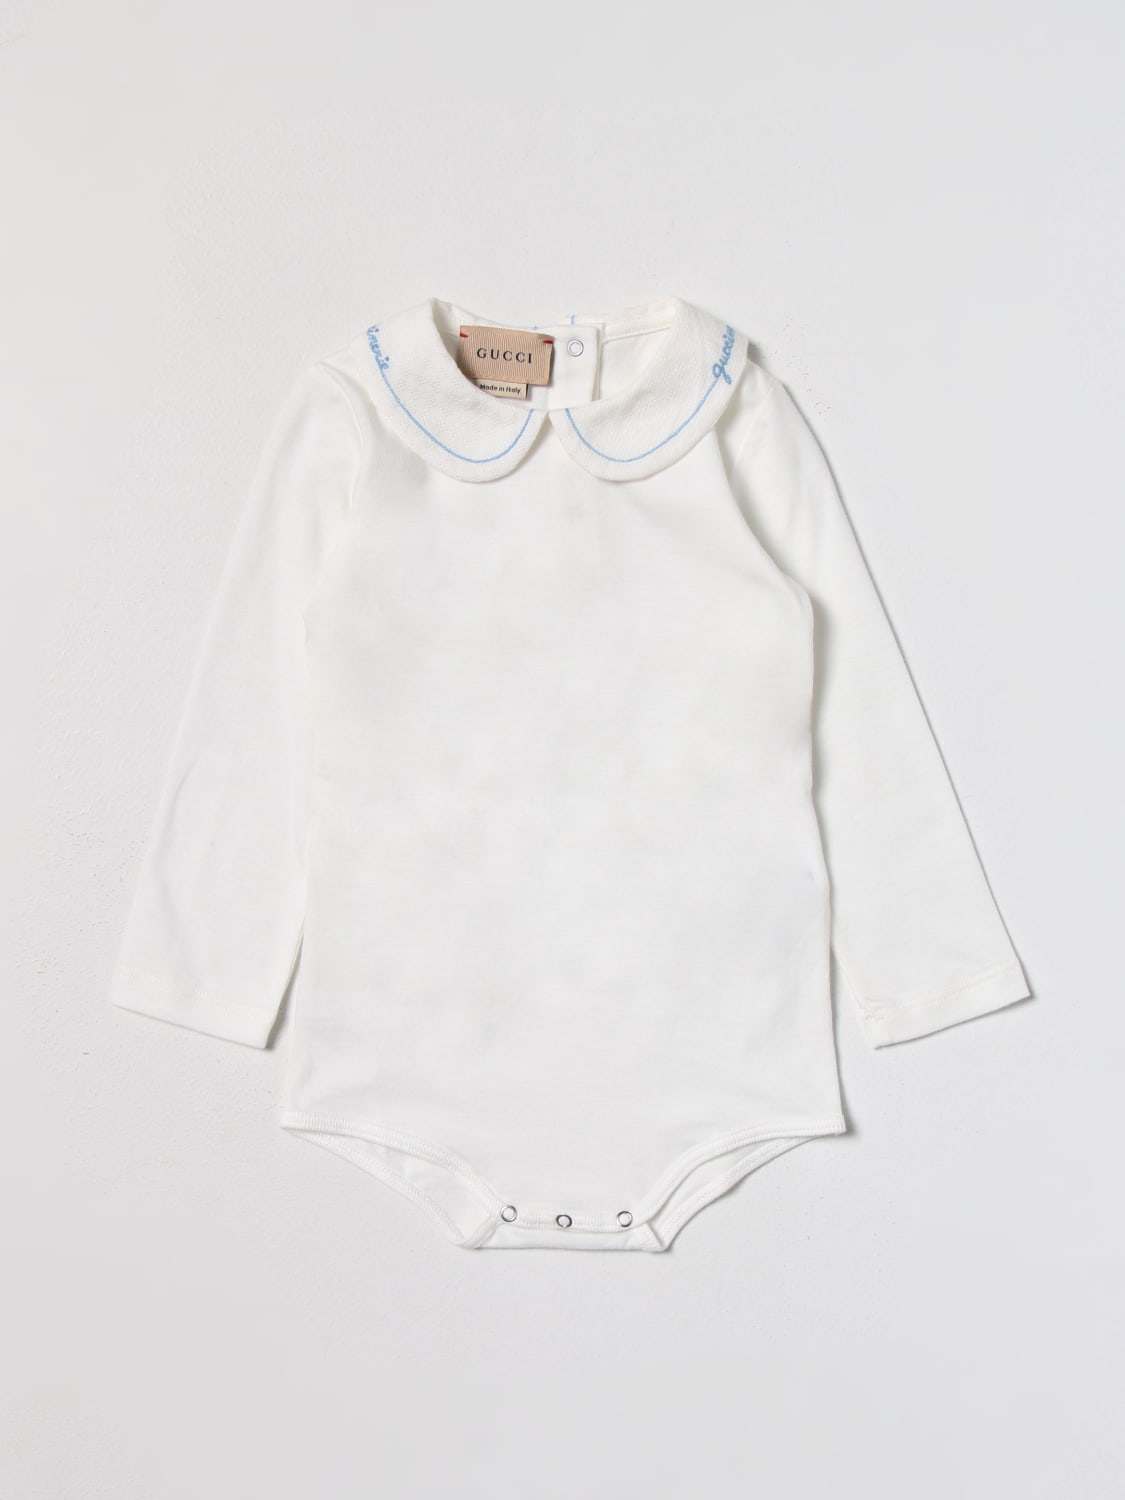 GUCCI: bodysuit for baby - White | Gucci bodysuit 749818XJFO7 online on ...